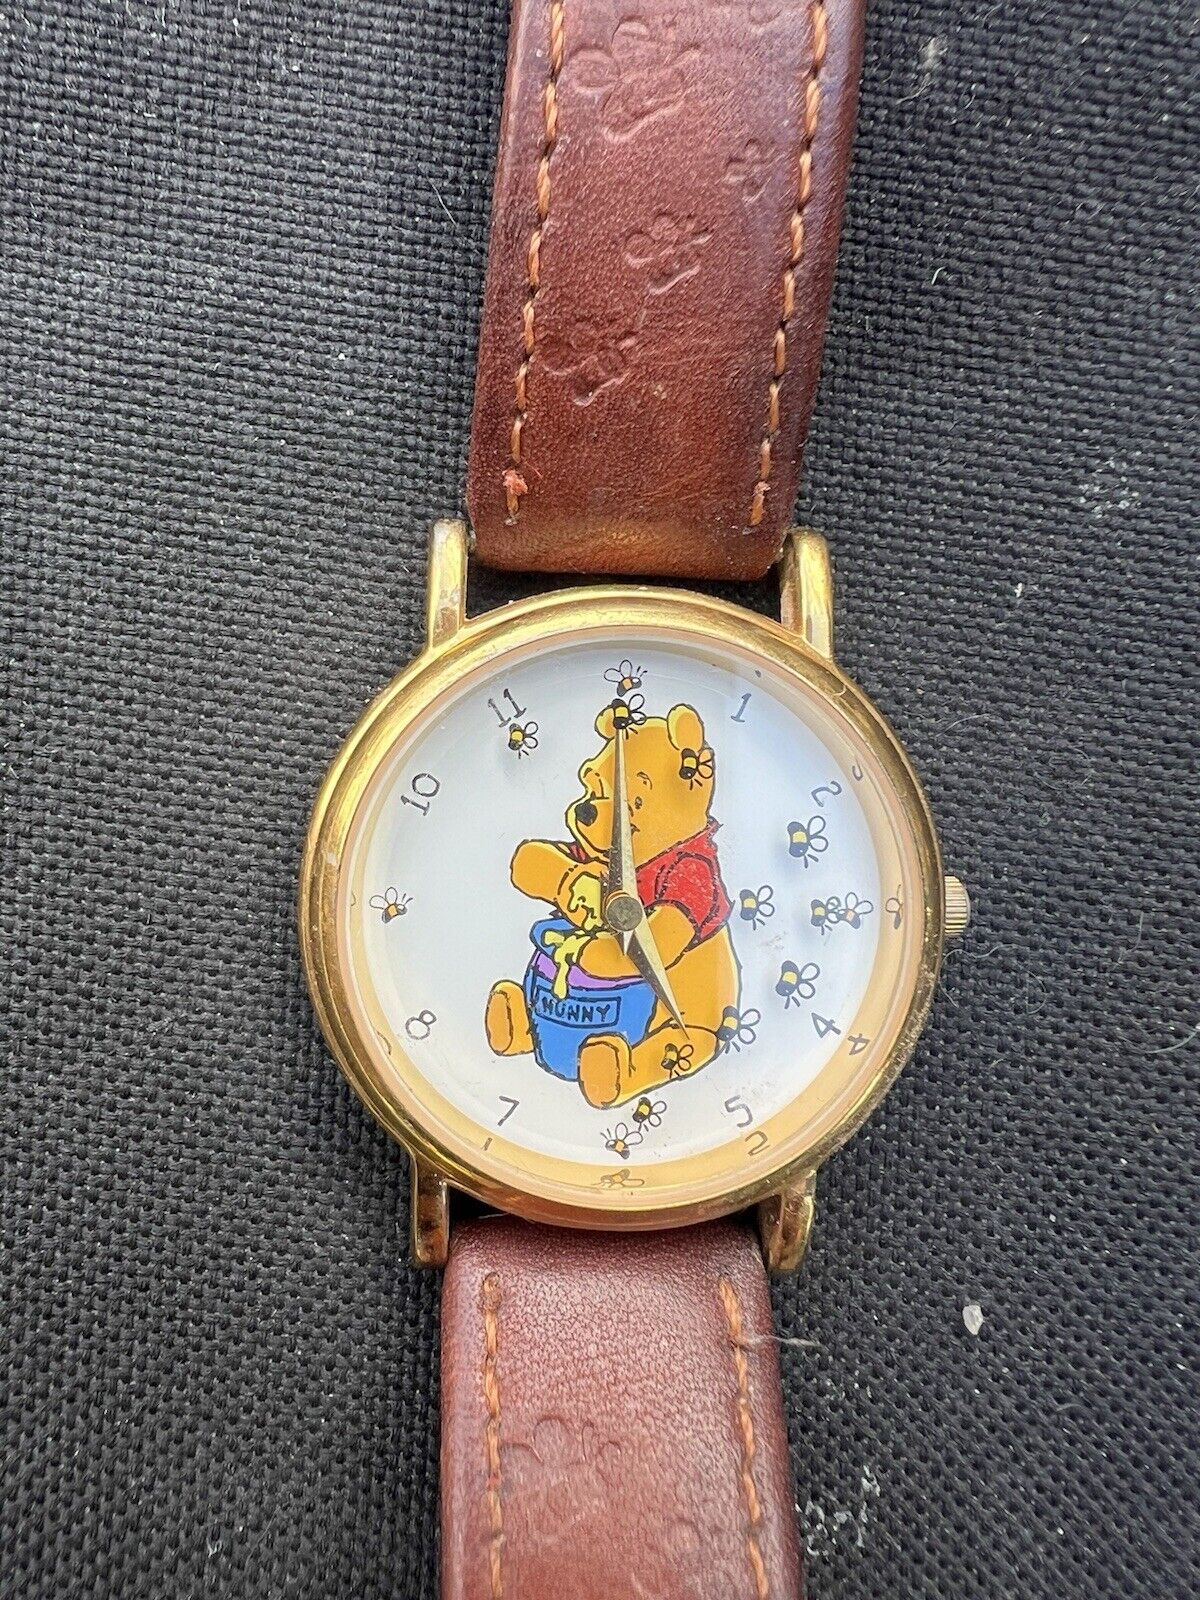 Vintage Disney Store Winnie The Pooh Watch With Bees - Needs Battery